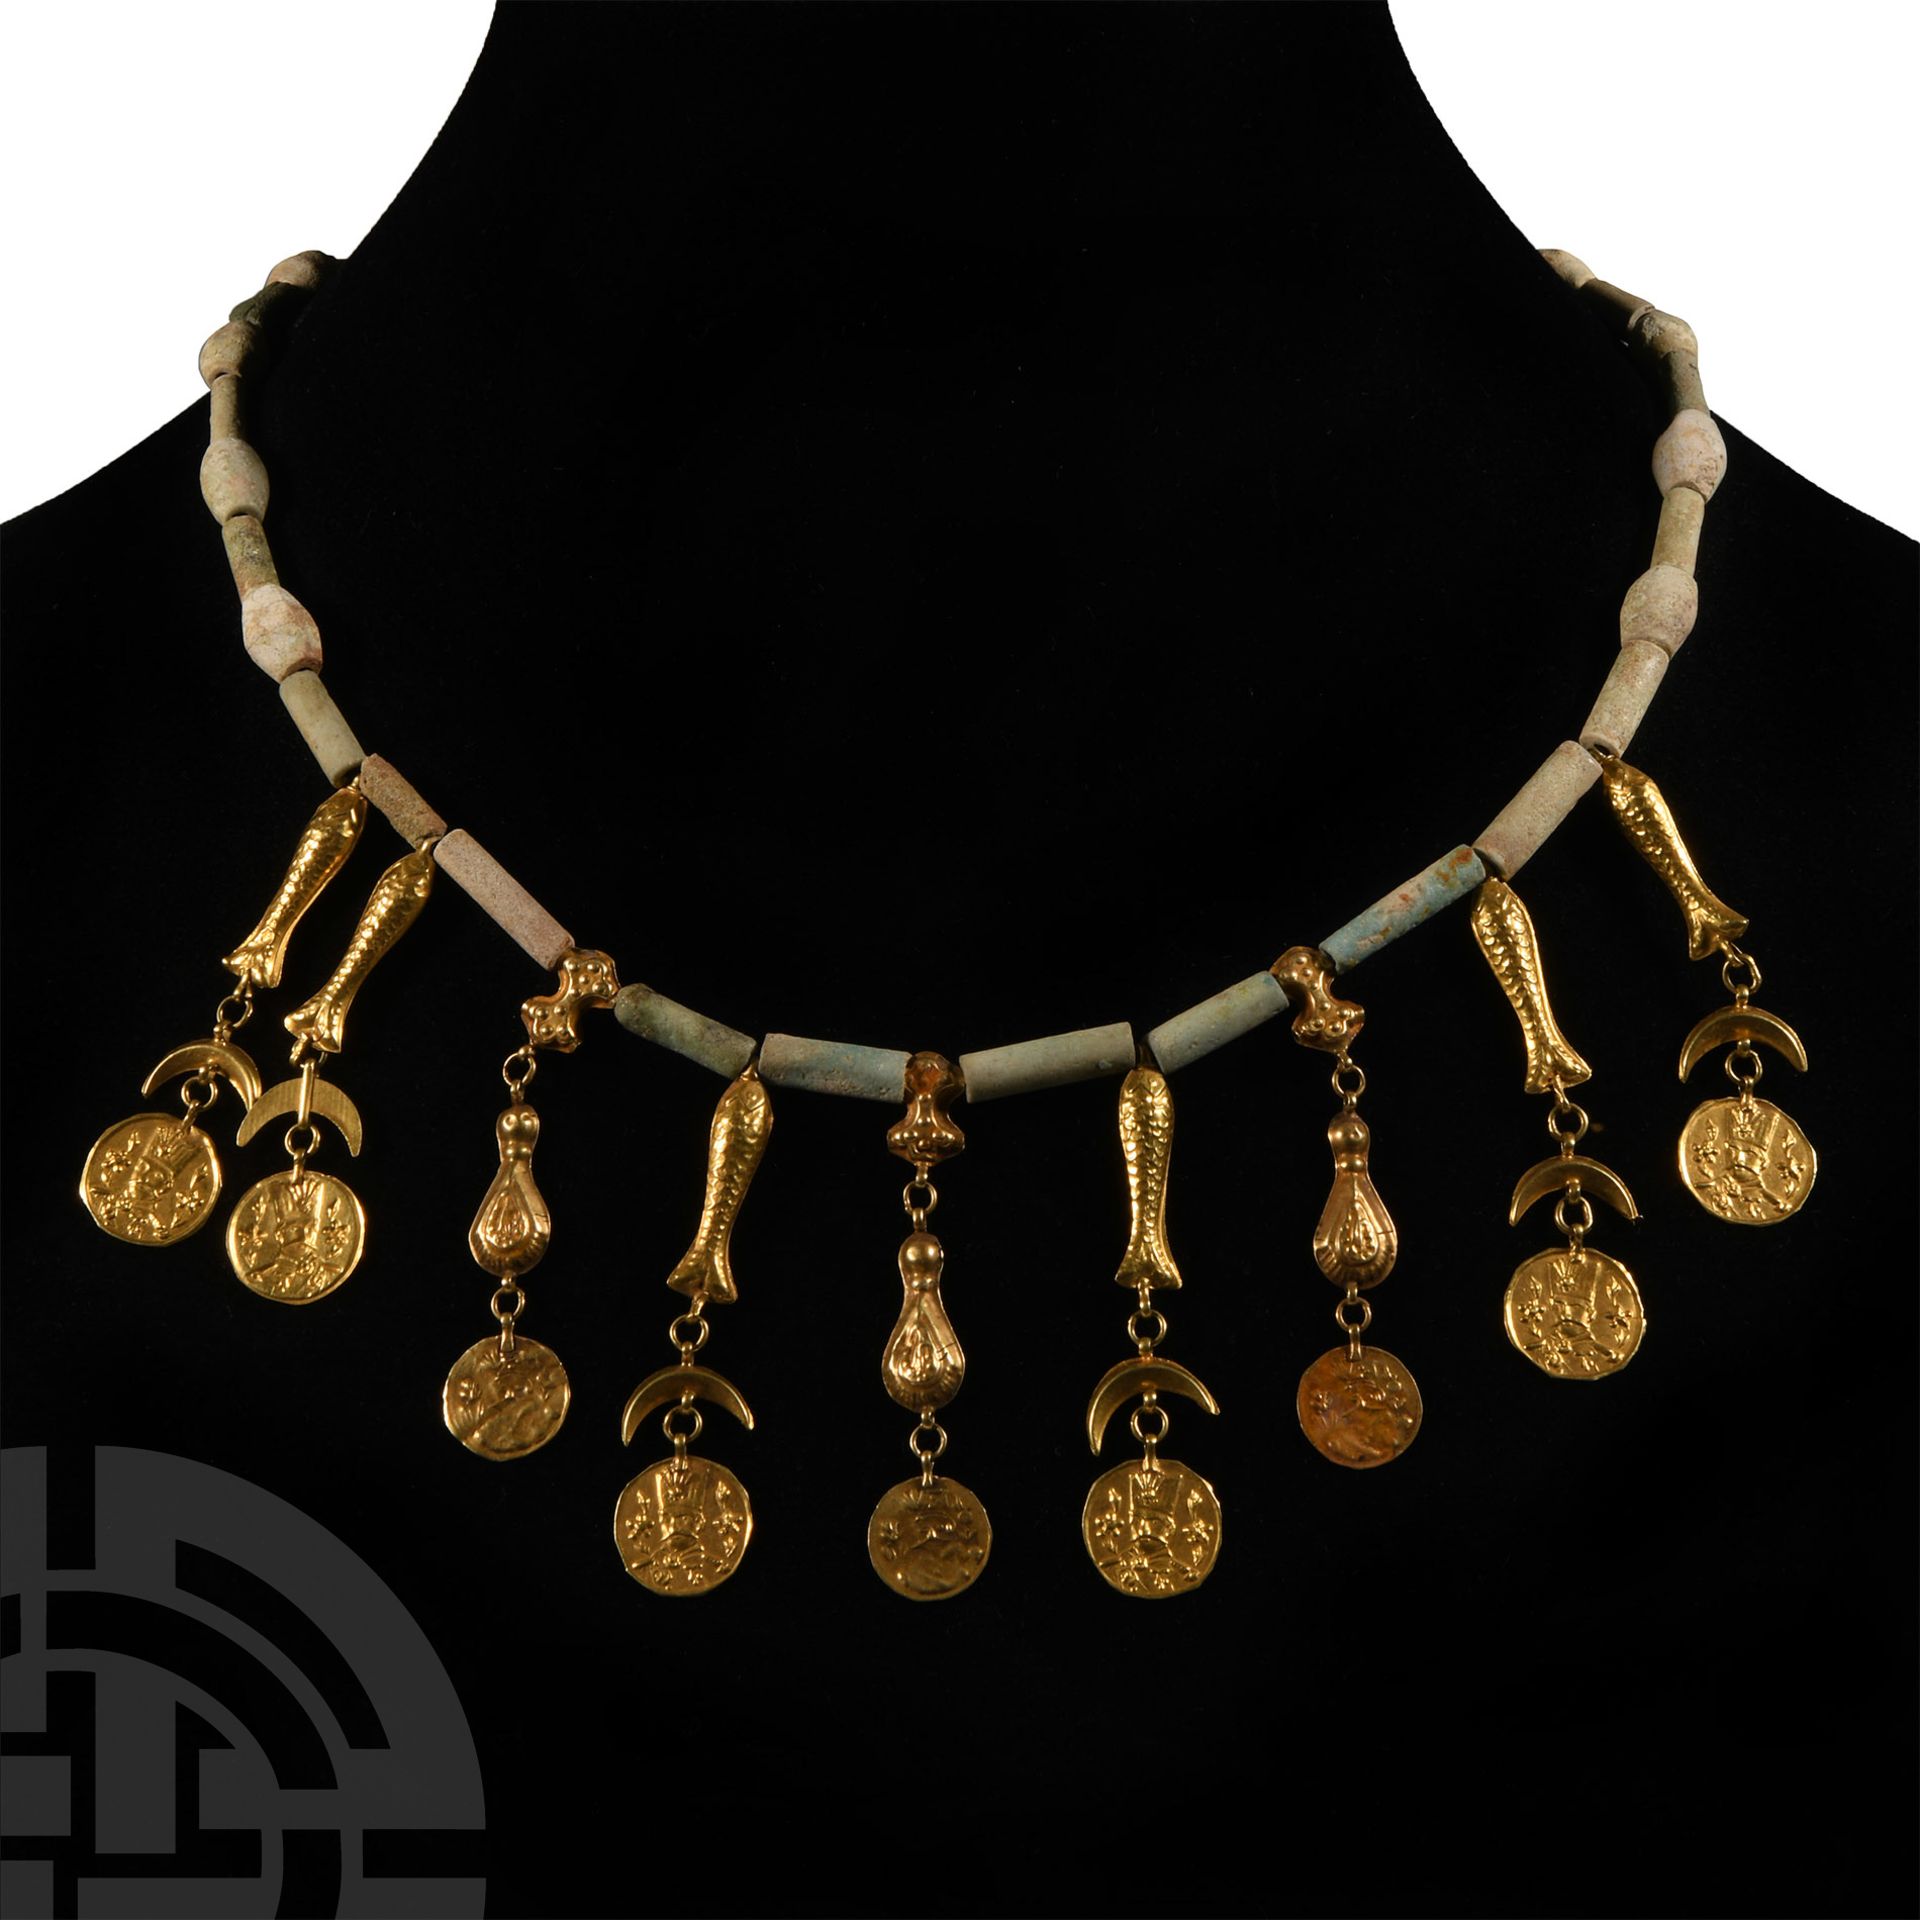 Qajar Necklace with Gold Pendants